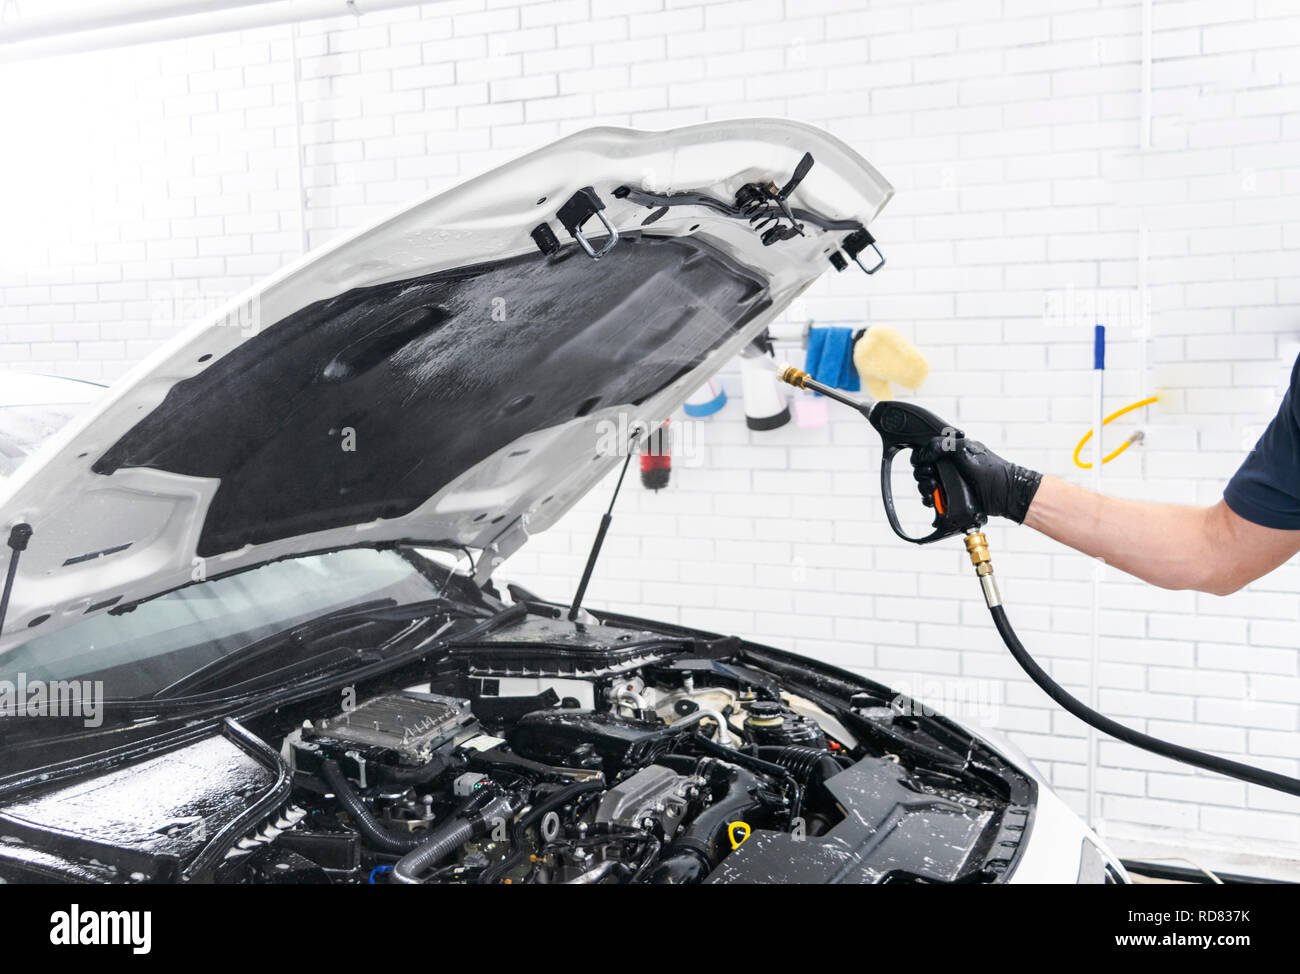 Car detailing. Manual car wash engine with pressure water. Washing car engine with water nozzle. Car washman worker cleaning vehicle engine. Man spray Stock Photo